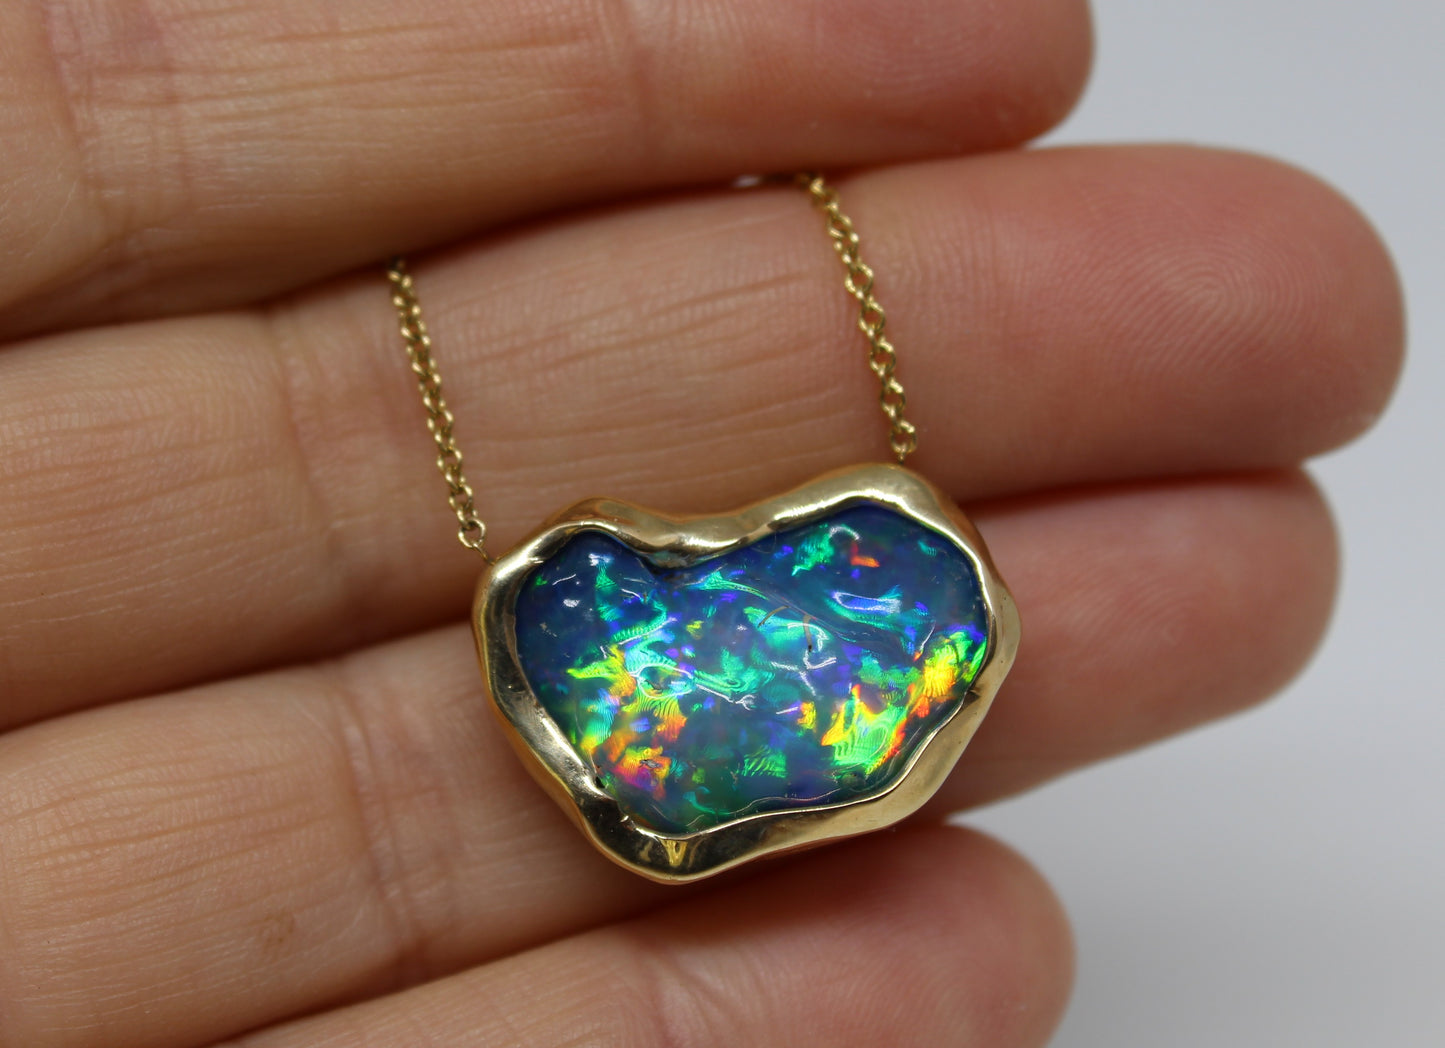 Carved Opal Pendant 14k Yellow Gold Split Chain Necklace #219